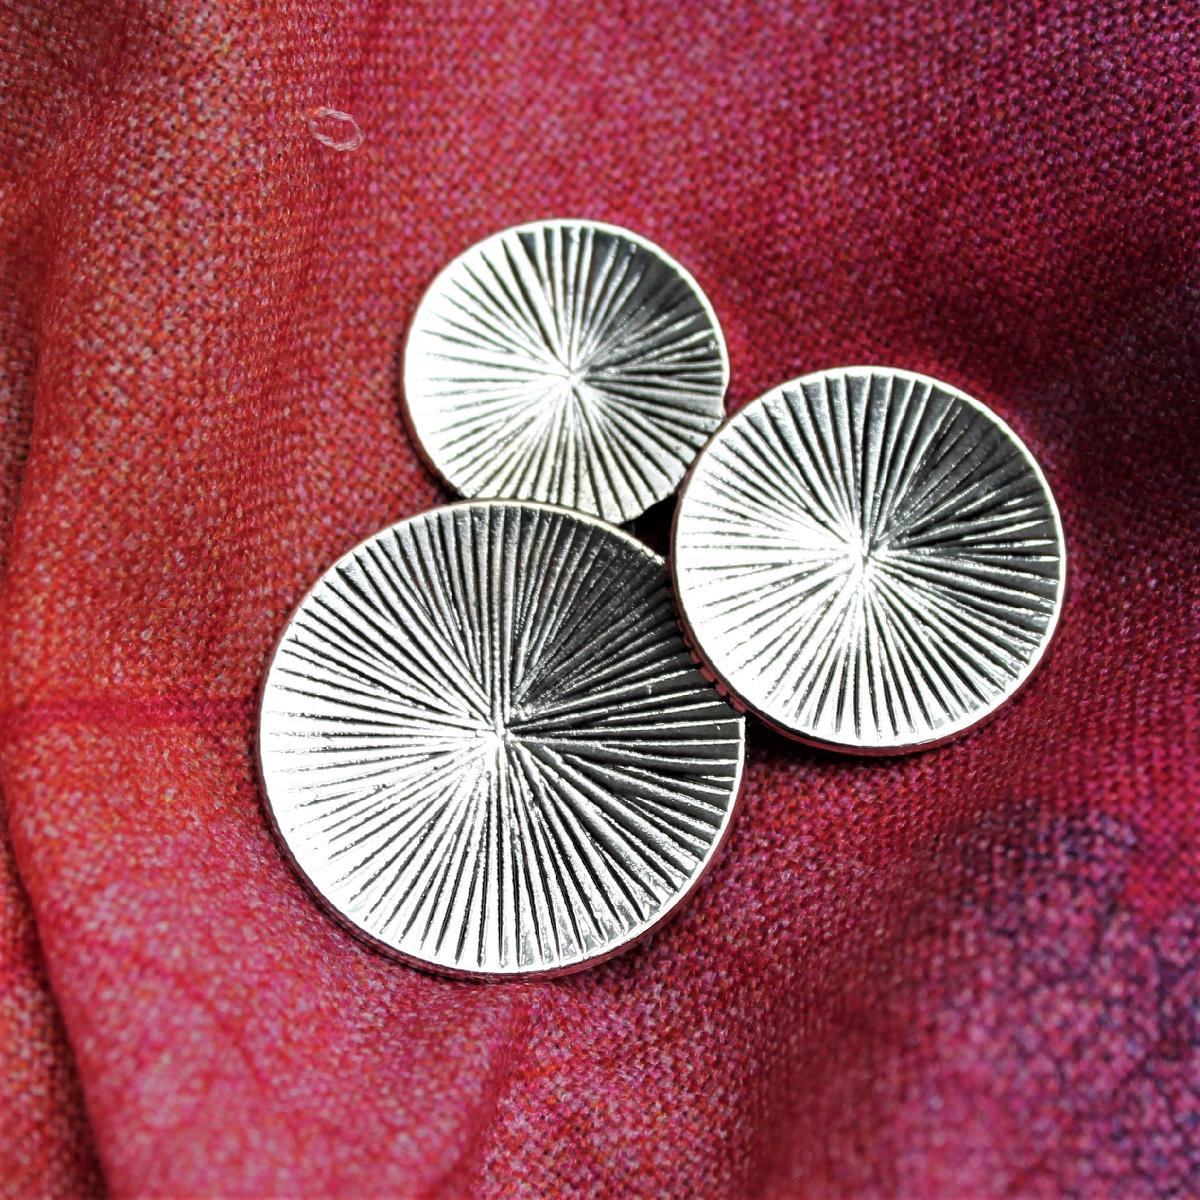 Magnetic Brooch with Three Circles, from Shona Donaldson